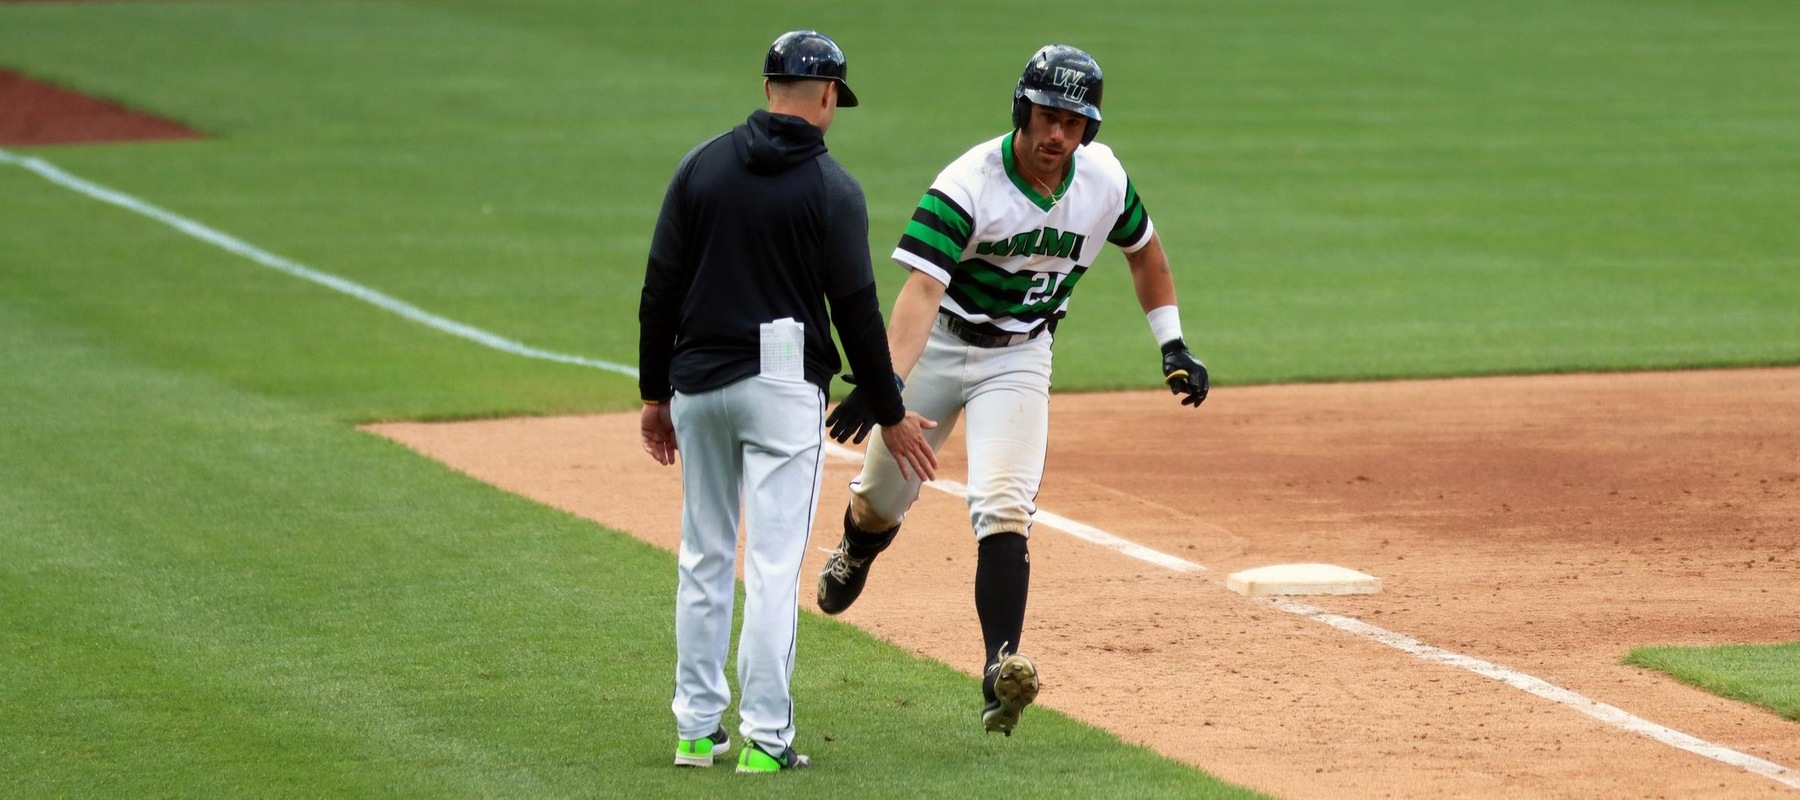 Photo of John Mead rounding the bases after his home run against West Chester at Citizens Bank Park. Copyright 2022; Wilmington University. All rights reserved. Photo by Dan Lauletta. April 19, 2022 vs. West Chester in Bill Giles Invitational at Citizens Banks Park.